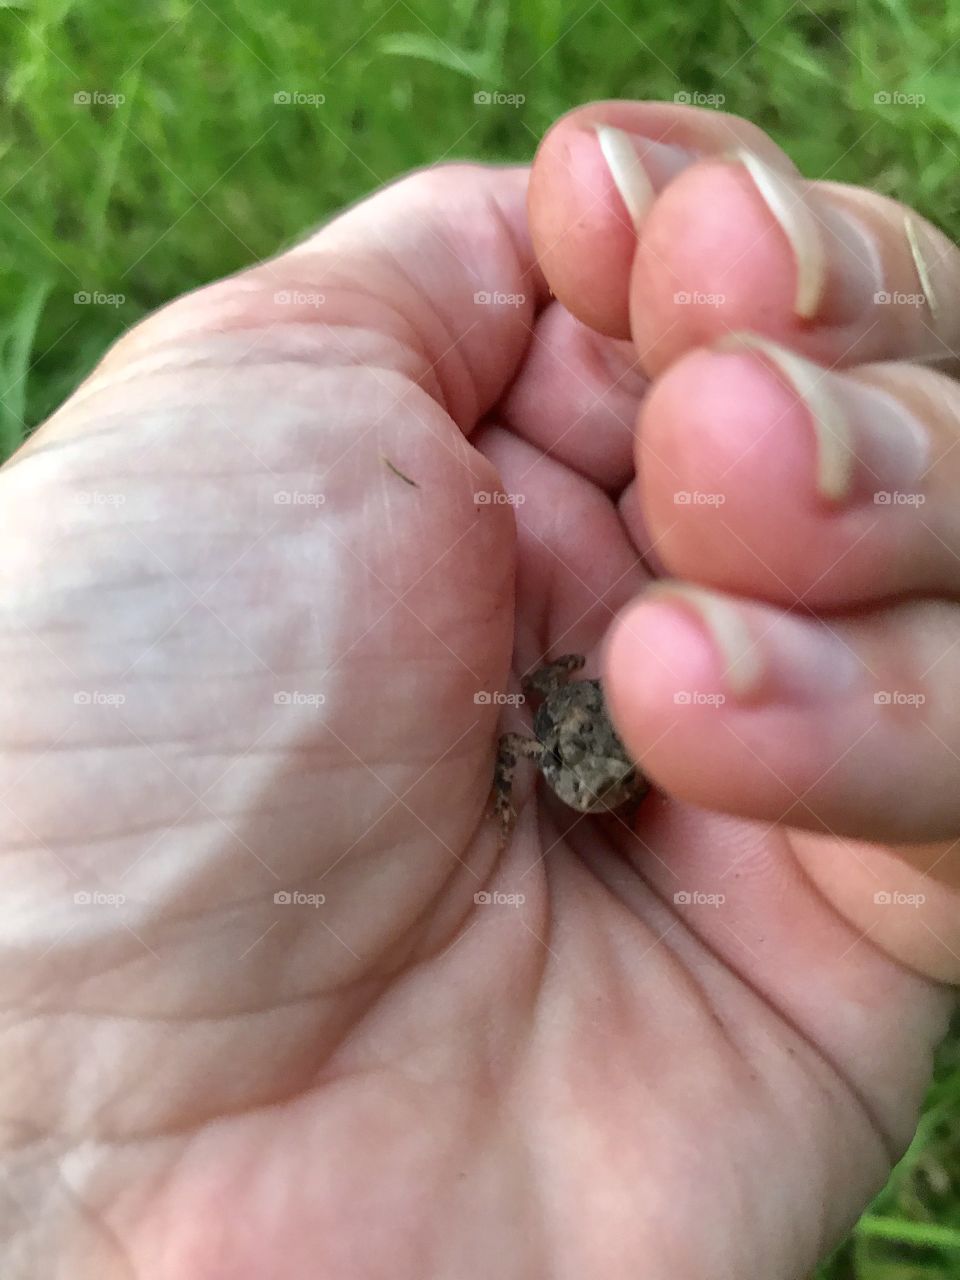 A hand holding the tiniest little toad who was hopping through the grass. 